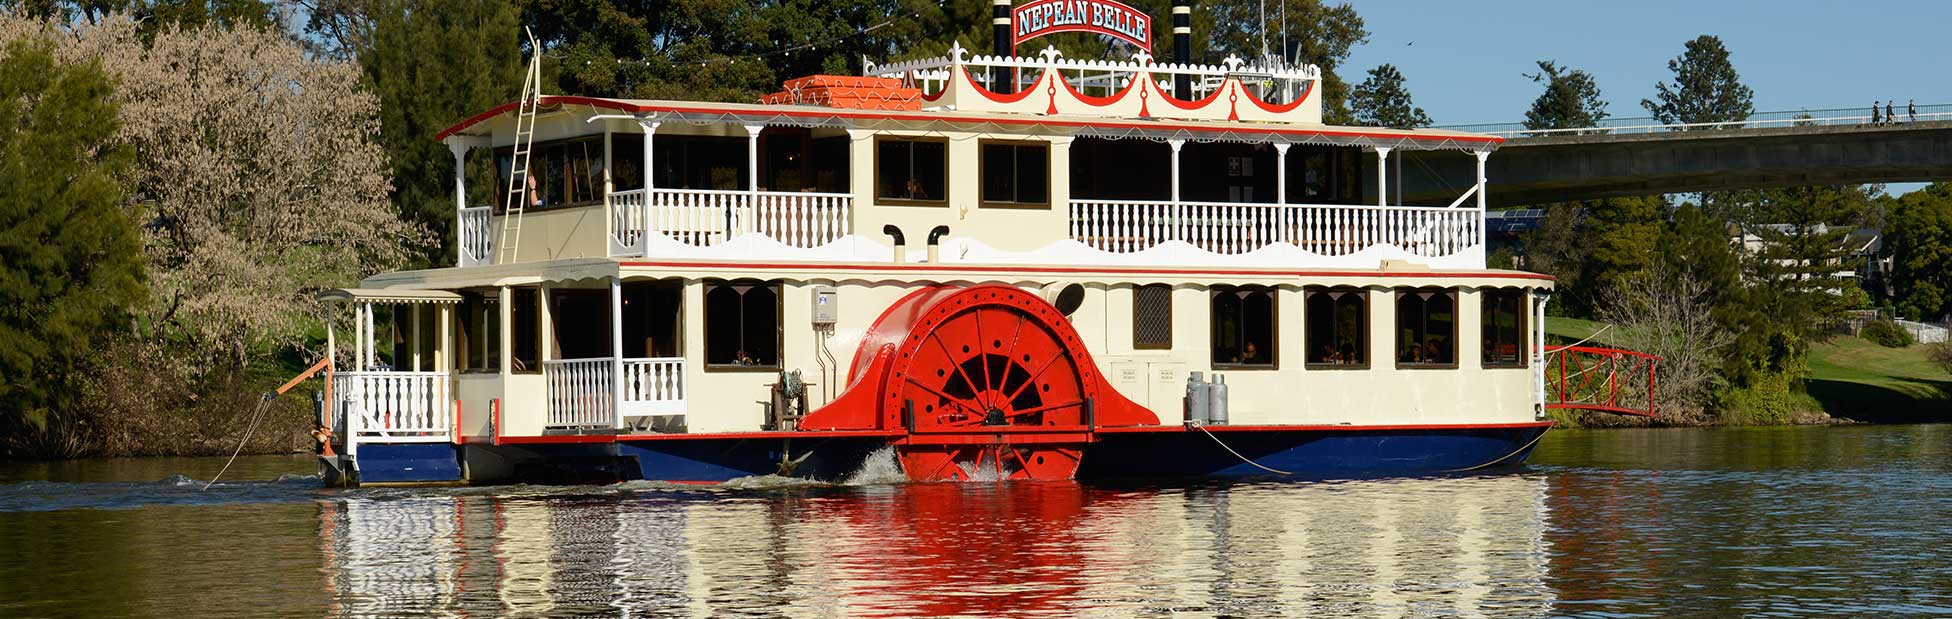 Nepean Belle Paddlewheeler on the water